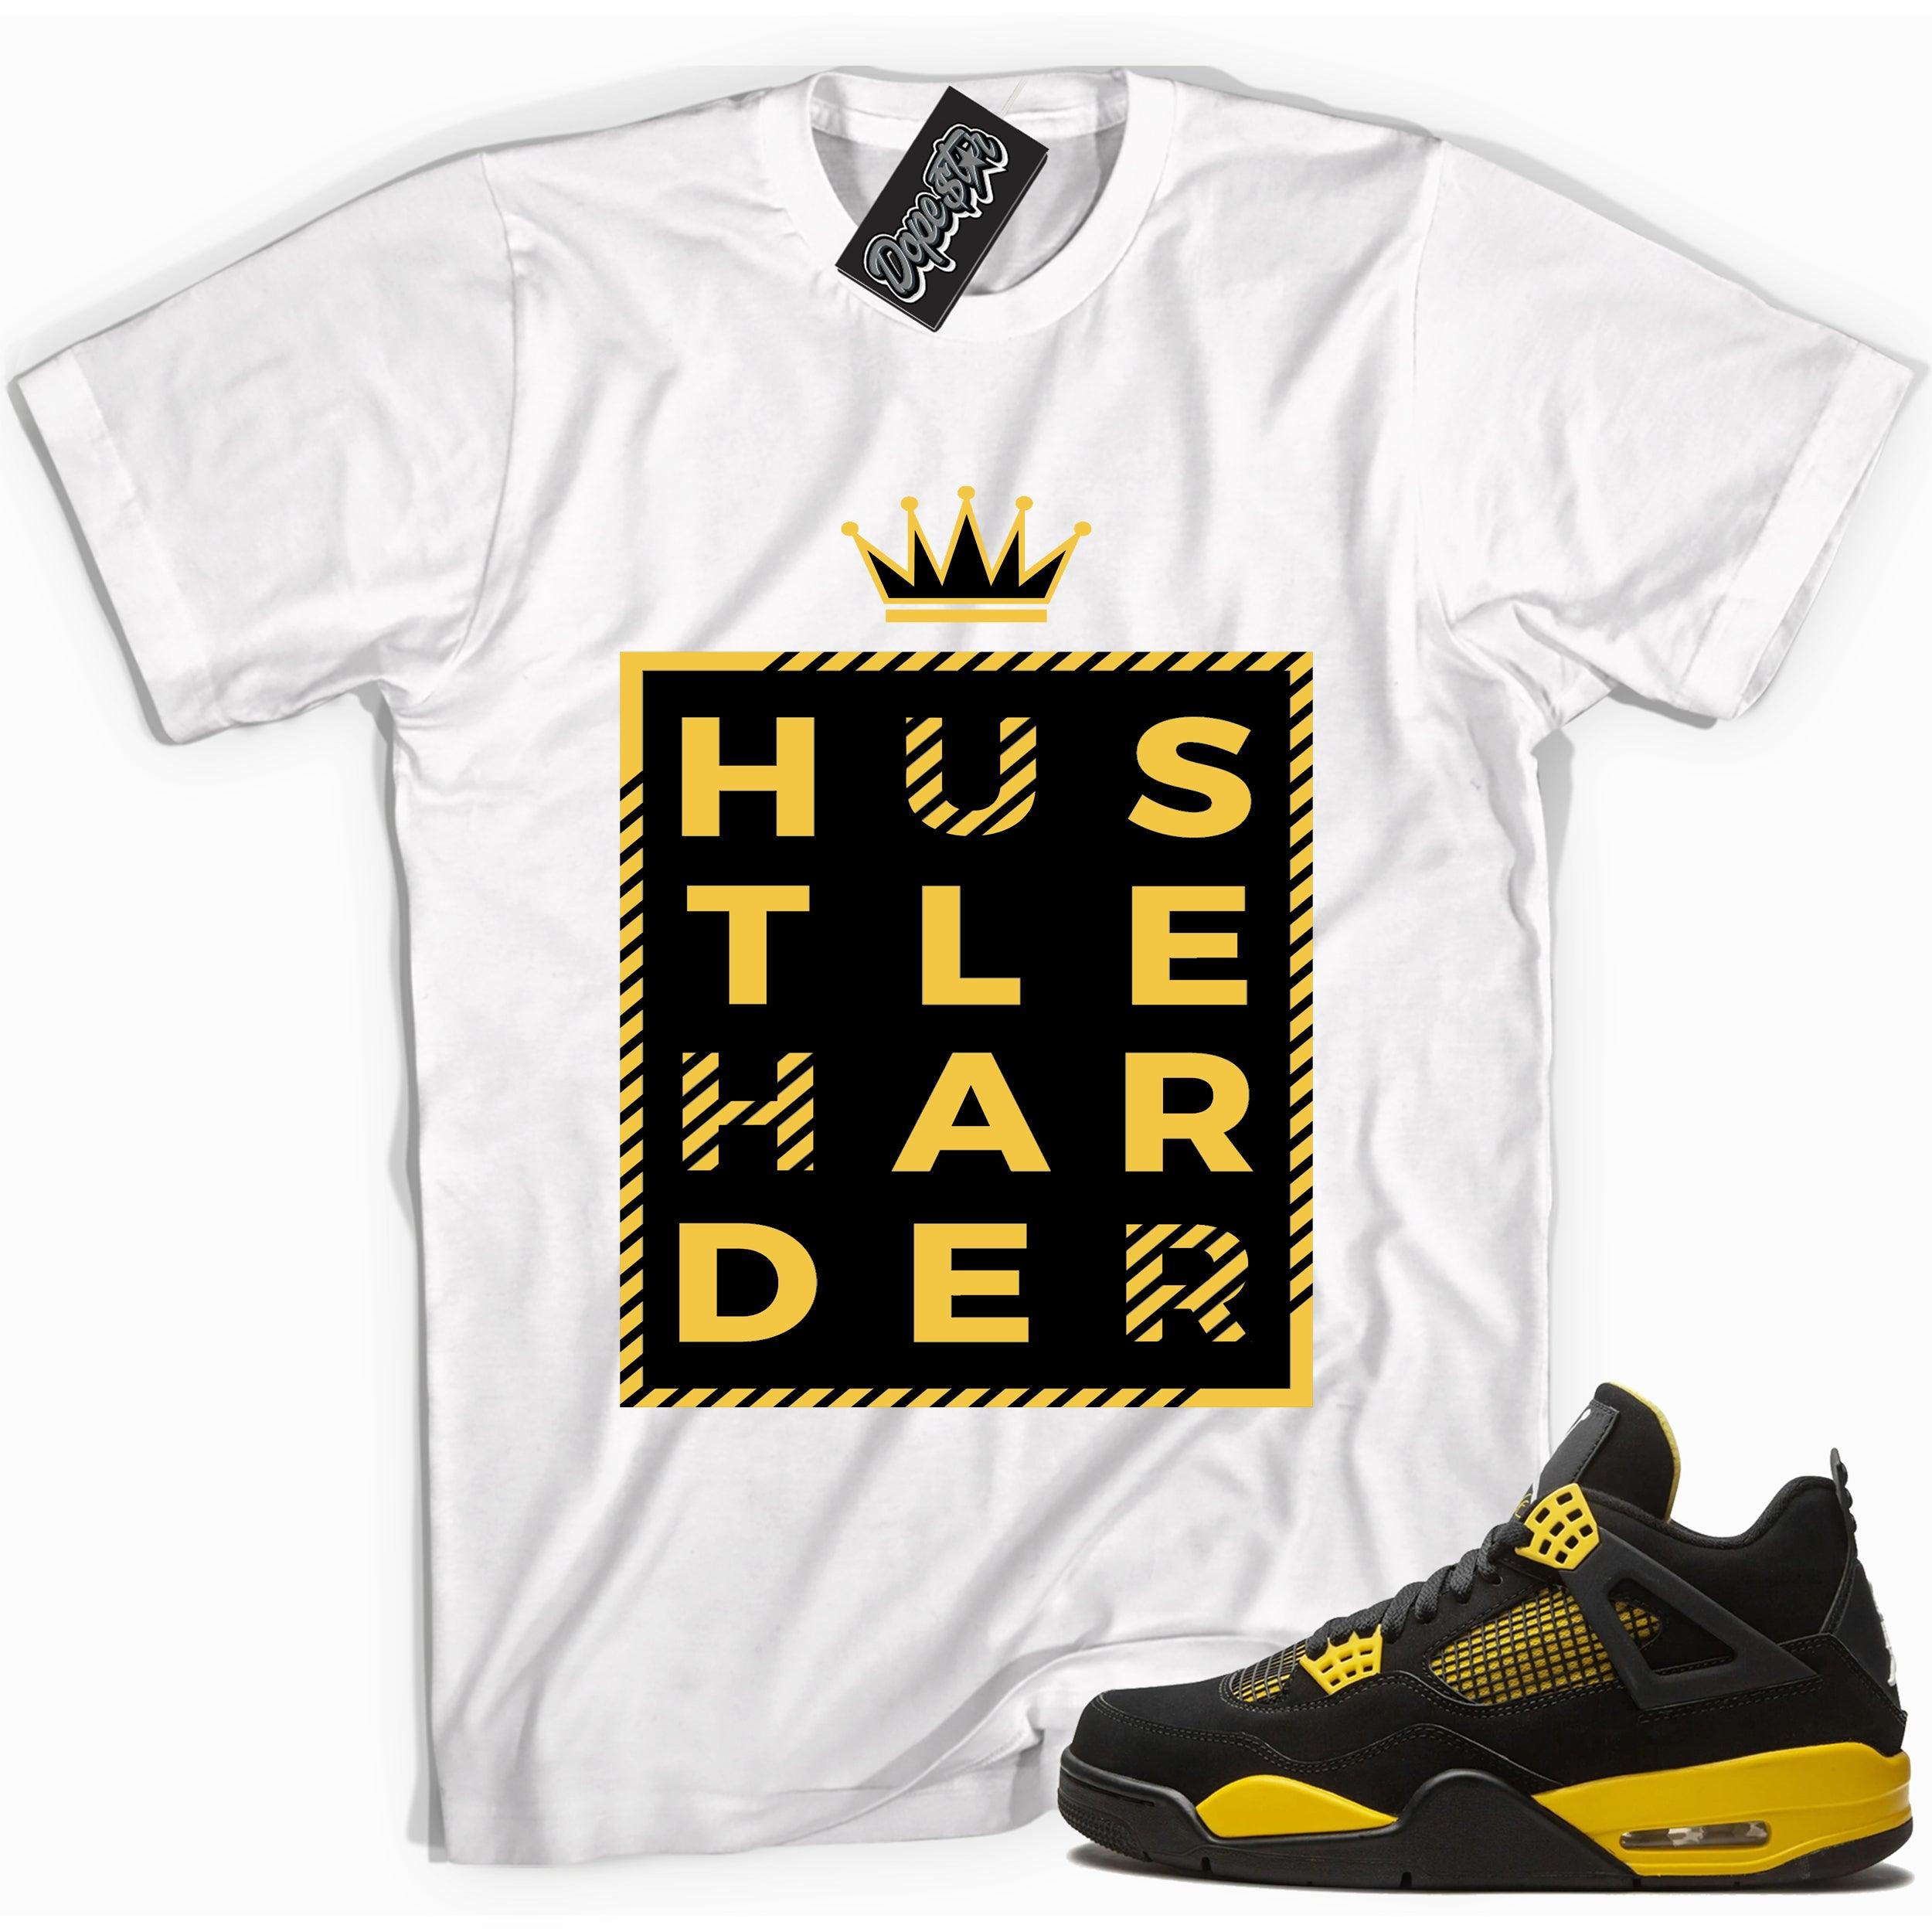 Cool white graphic tee with 'hustle harder' print, that perfectly matches Air Jordan 4 Thunder sneakers